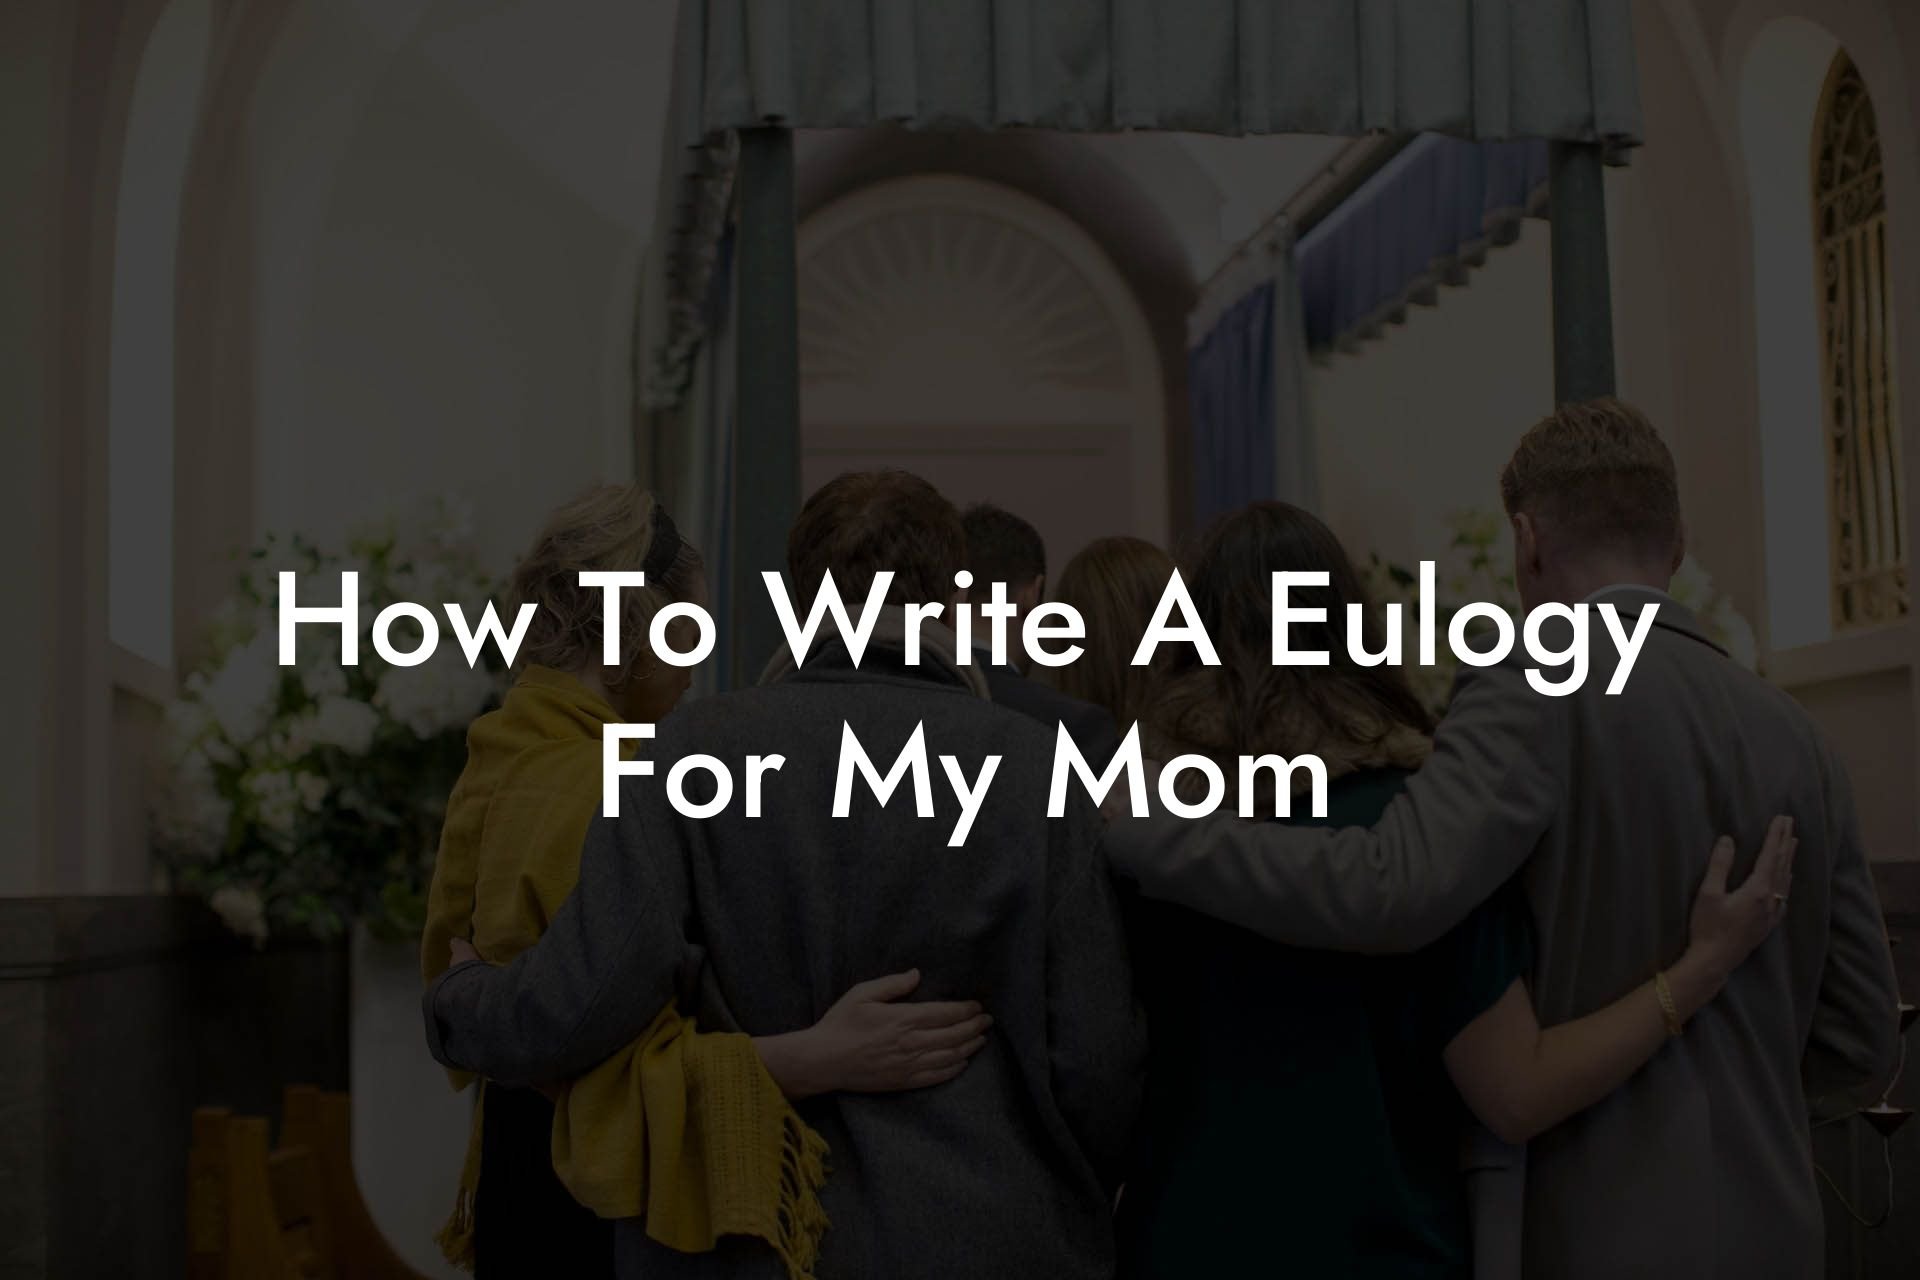 How To Write A Eulogy For My Mom